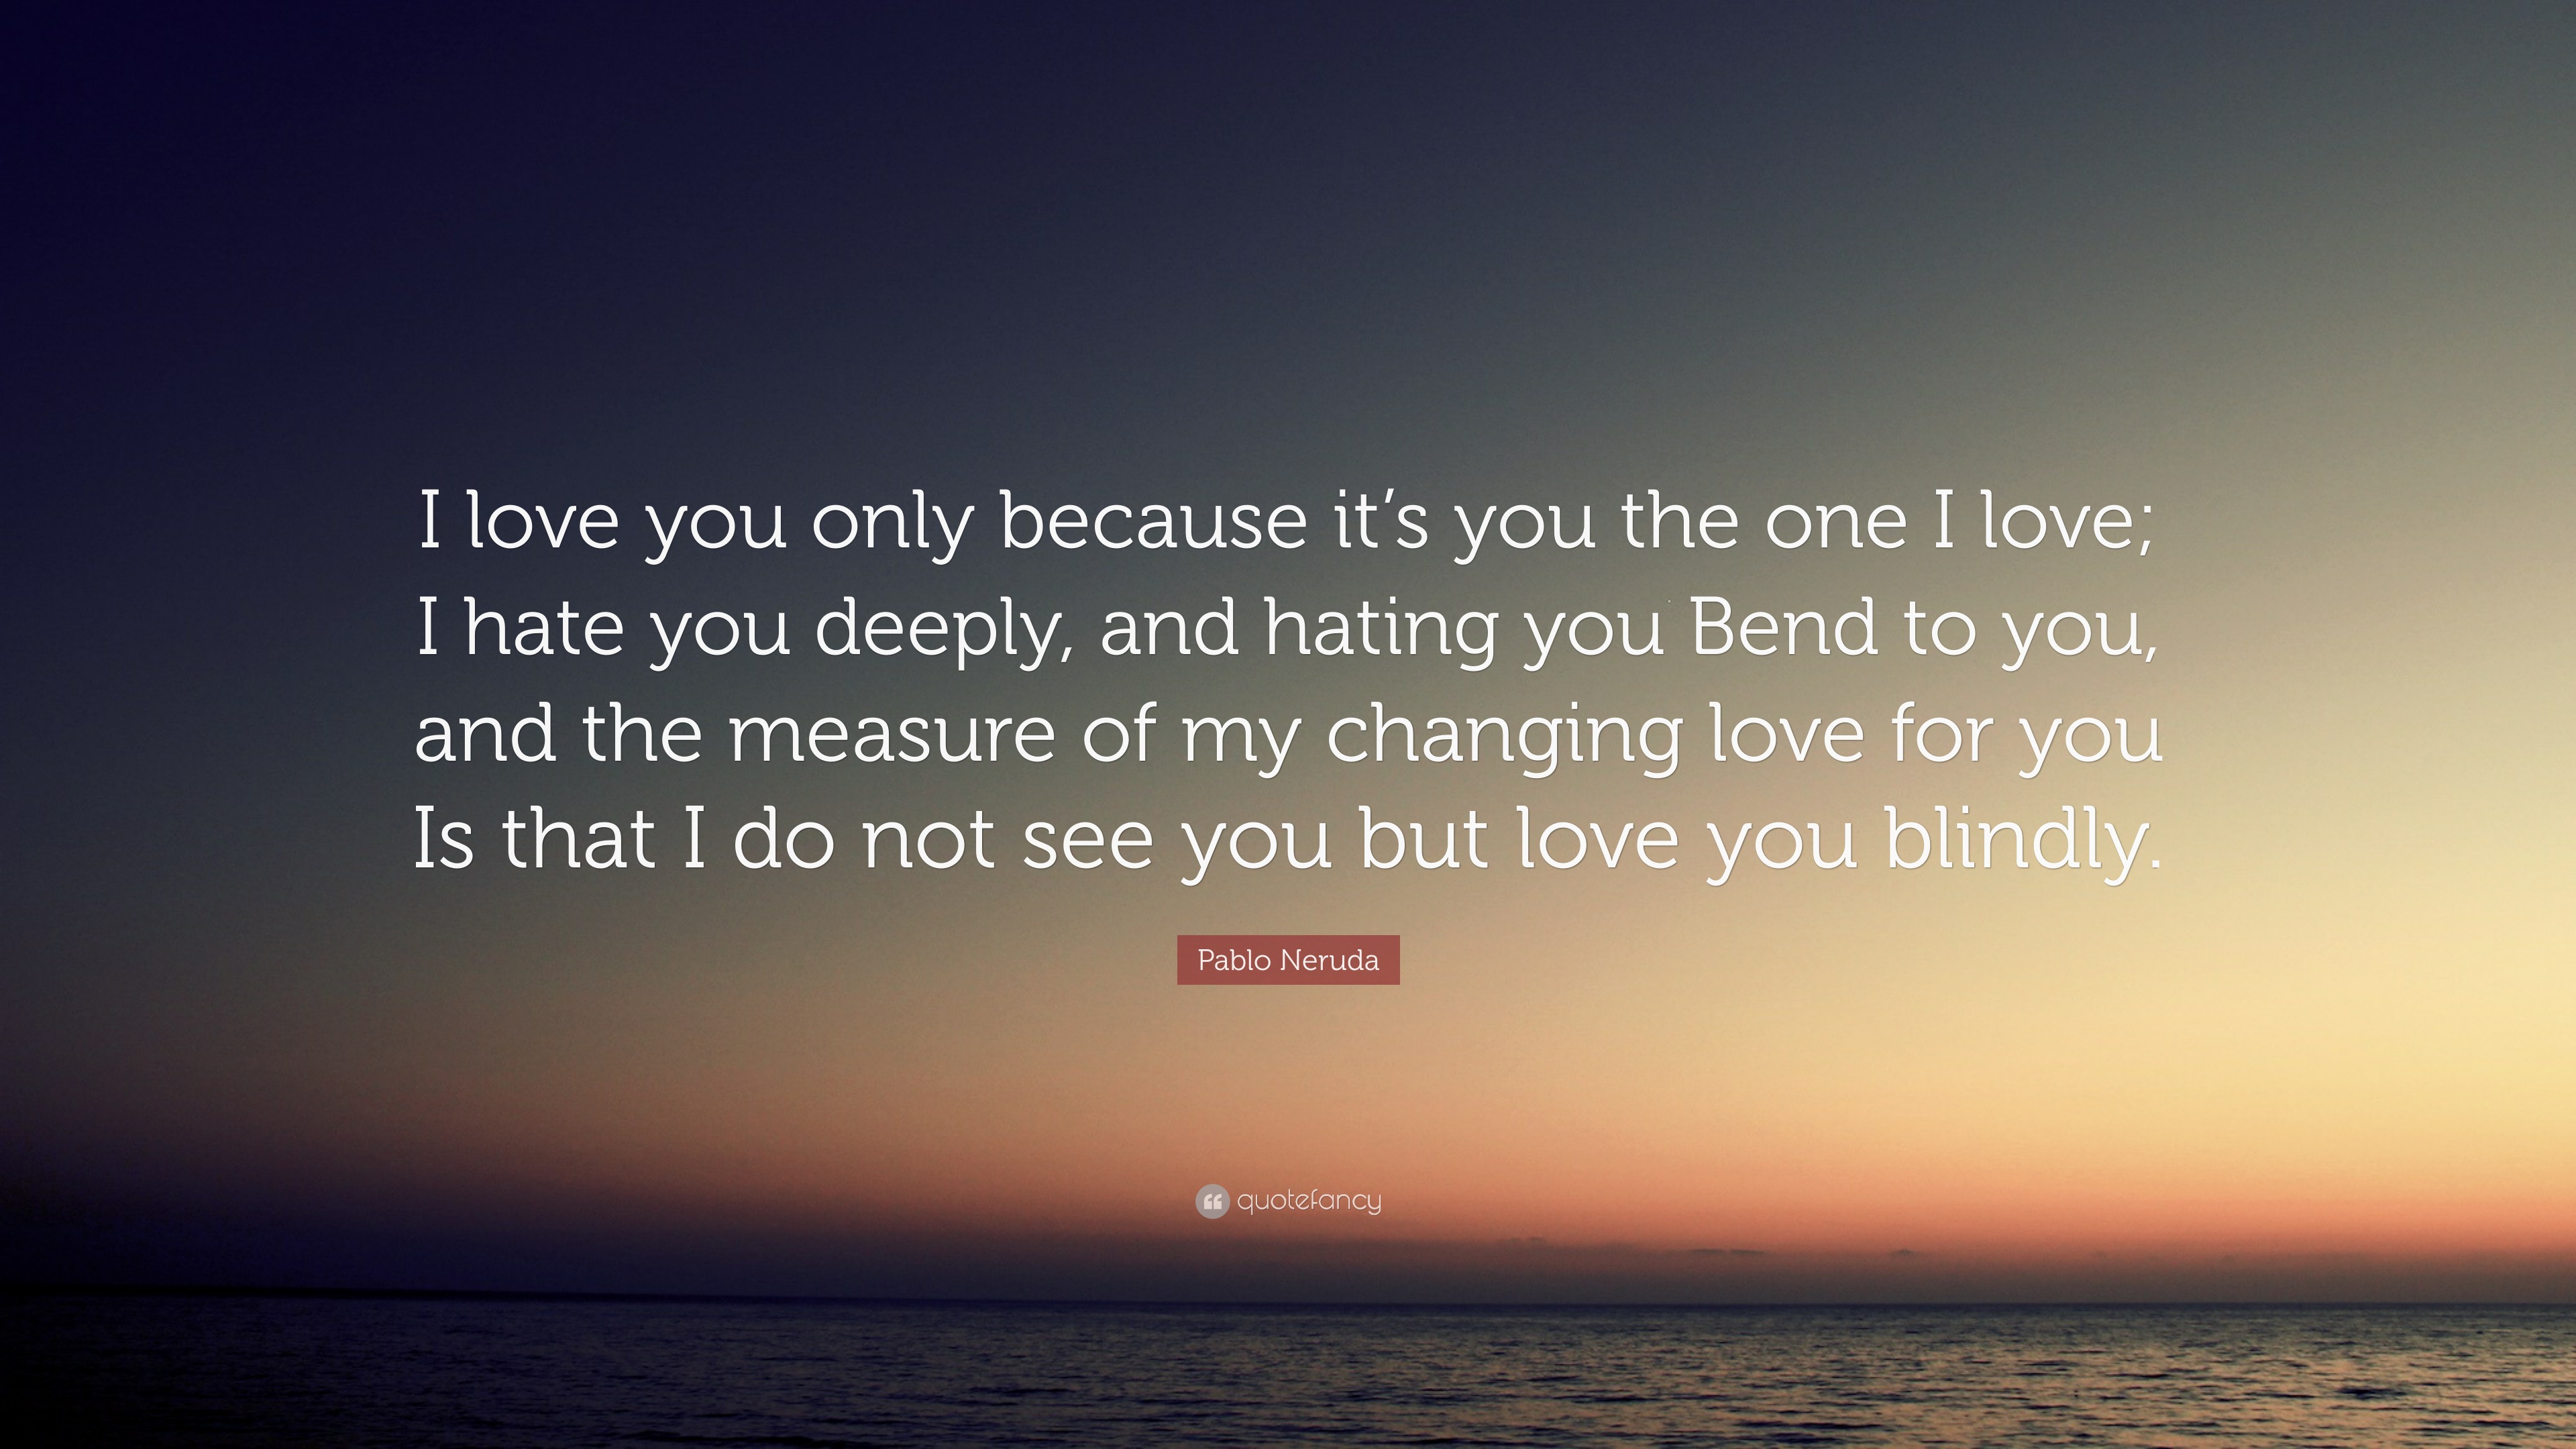 Pablo Neruda Quote “I love you only because it s you the one I love